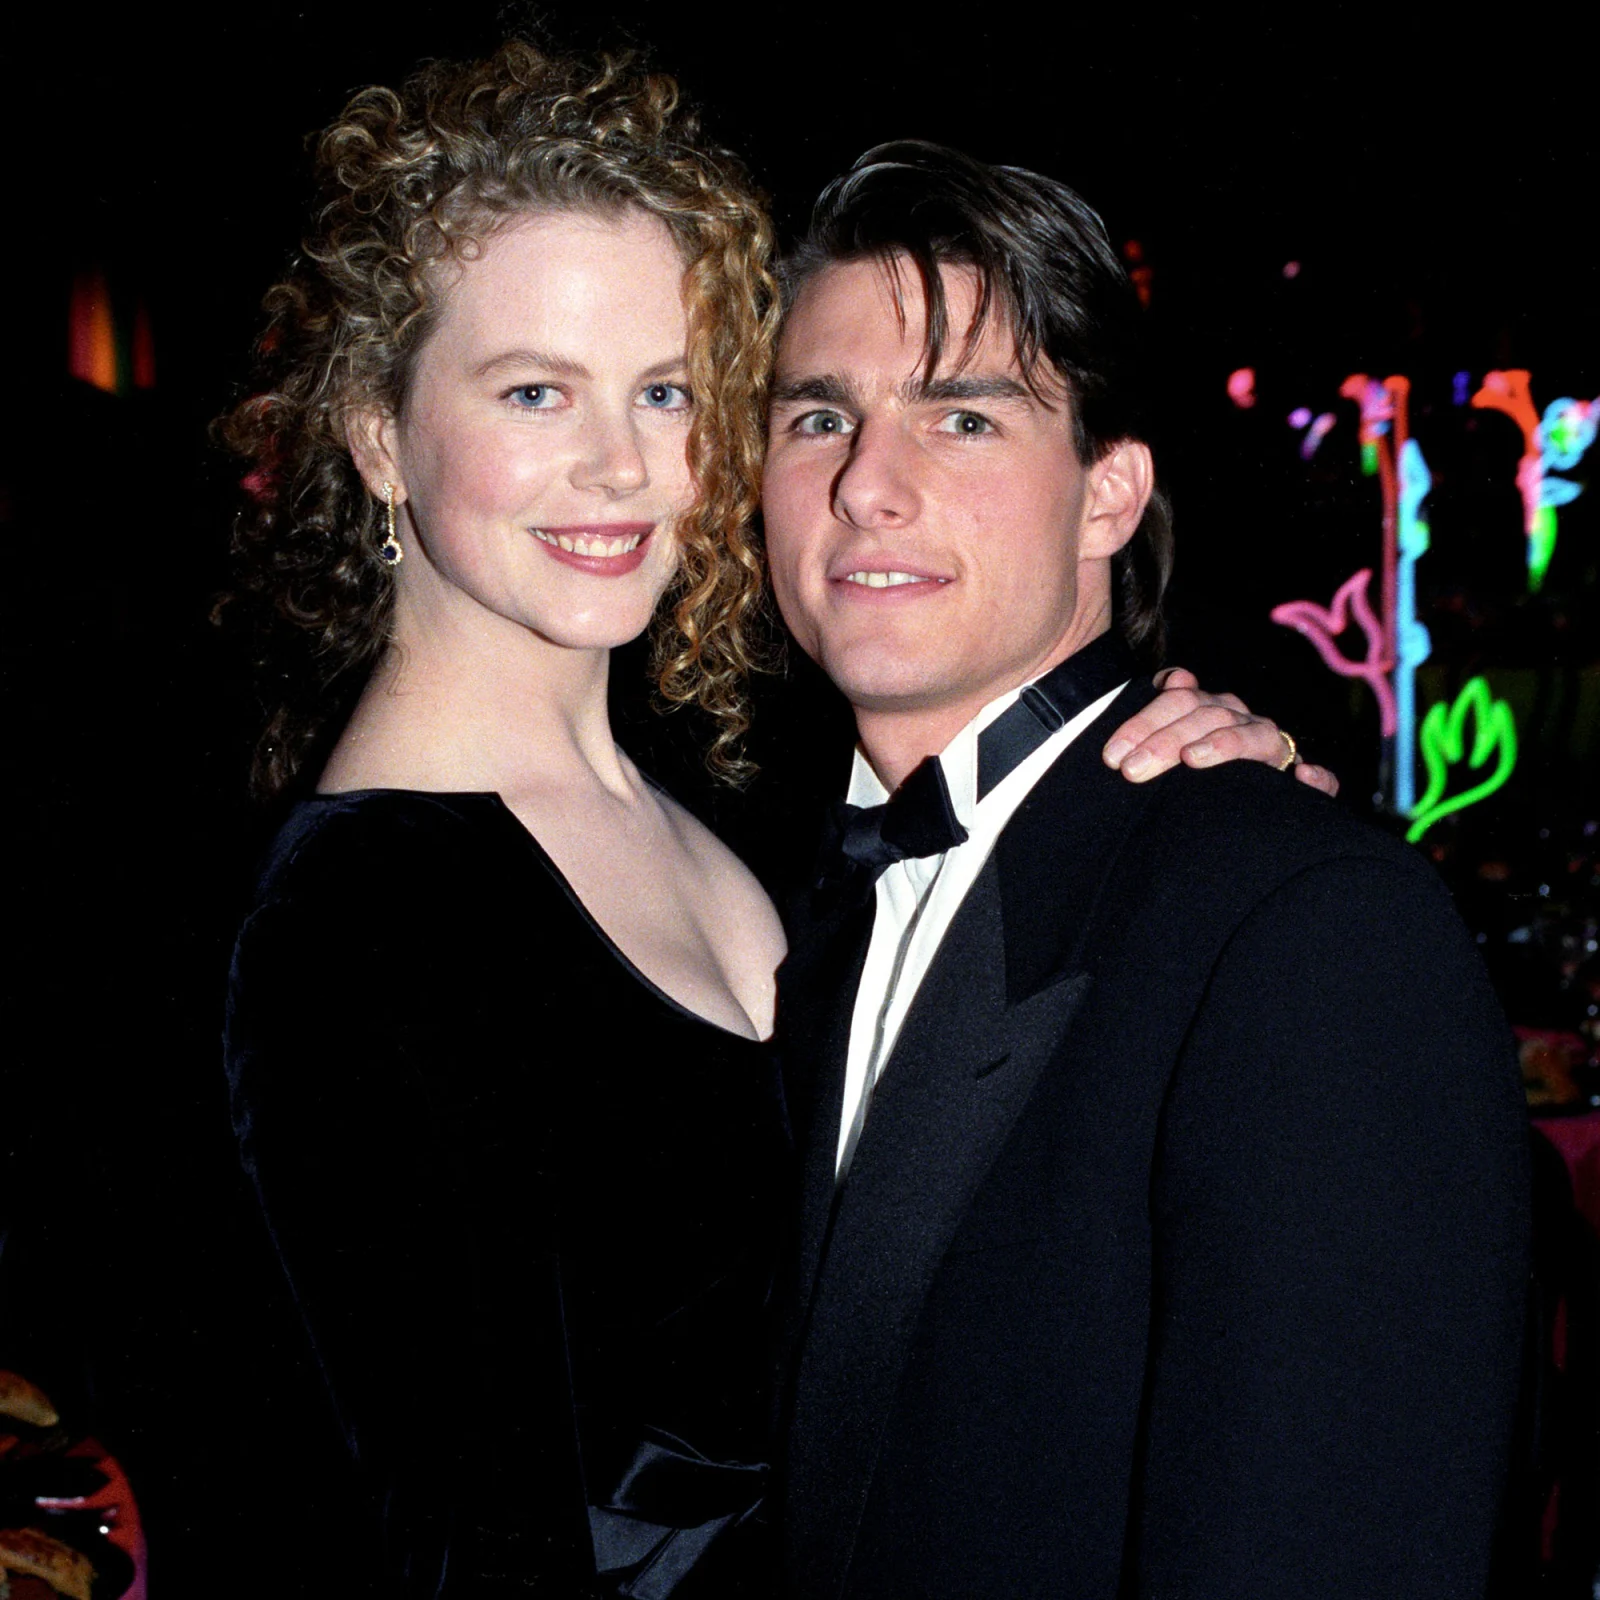 Nicole Kidman was previously married to Tom Cruise